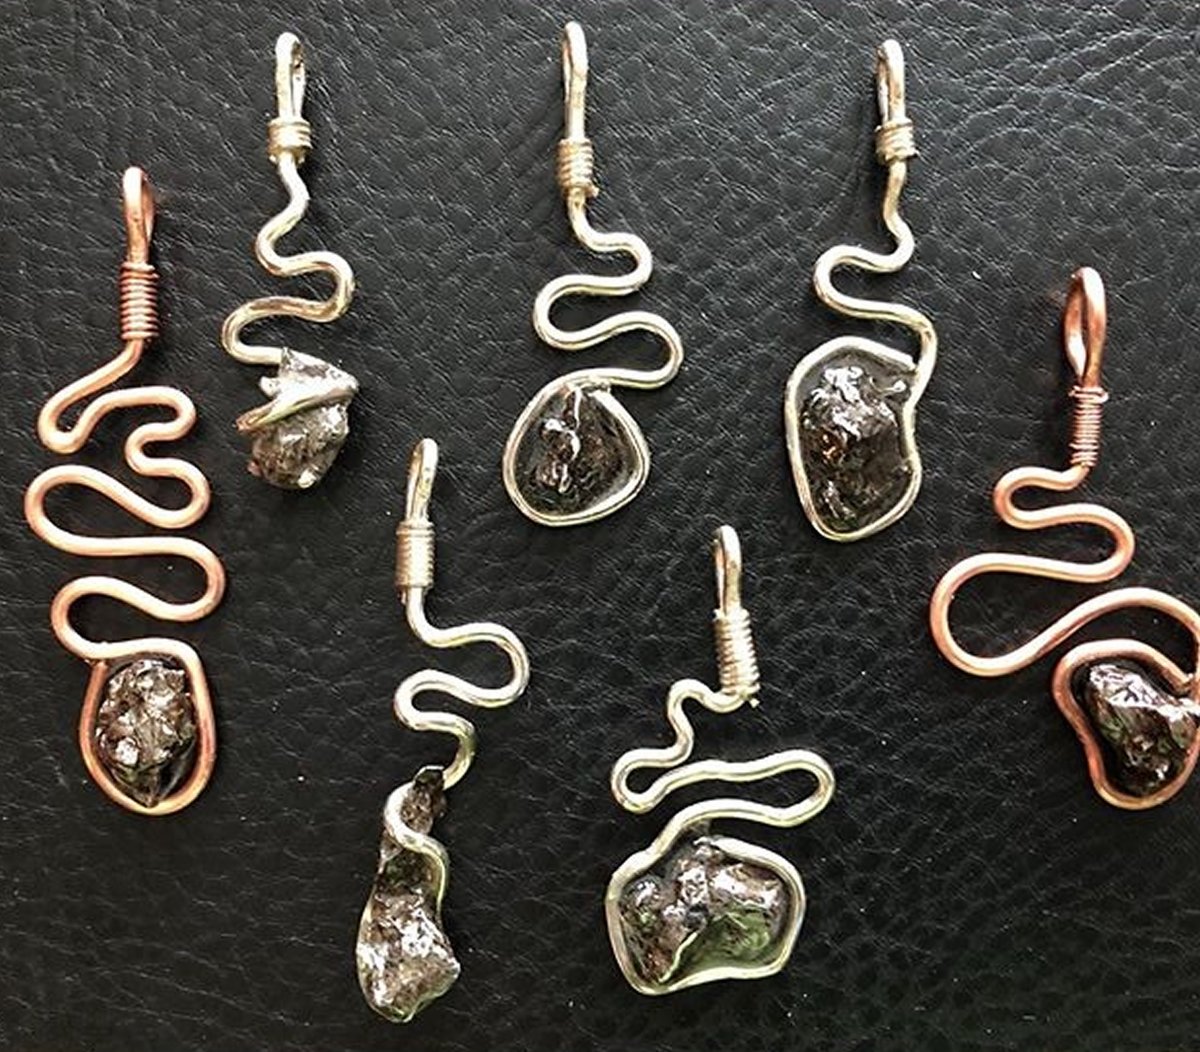 Meteorite coil pendants in sterling silver or copper. Which path represents your life journey. Buy at #lifescoil lifescoil.com. #meteoritejewelry #uniquejewelry #stonejewelry #silverjewelry #copperjewelry #bohostyle #gothgirl #heavymetal